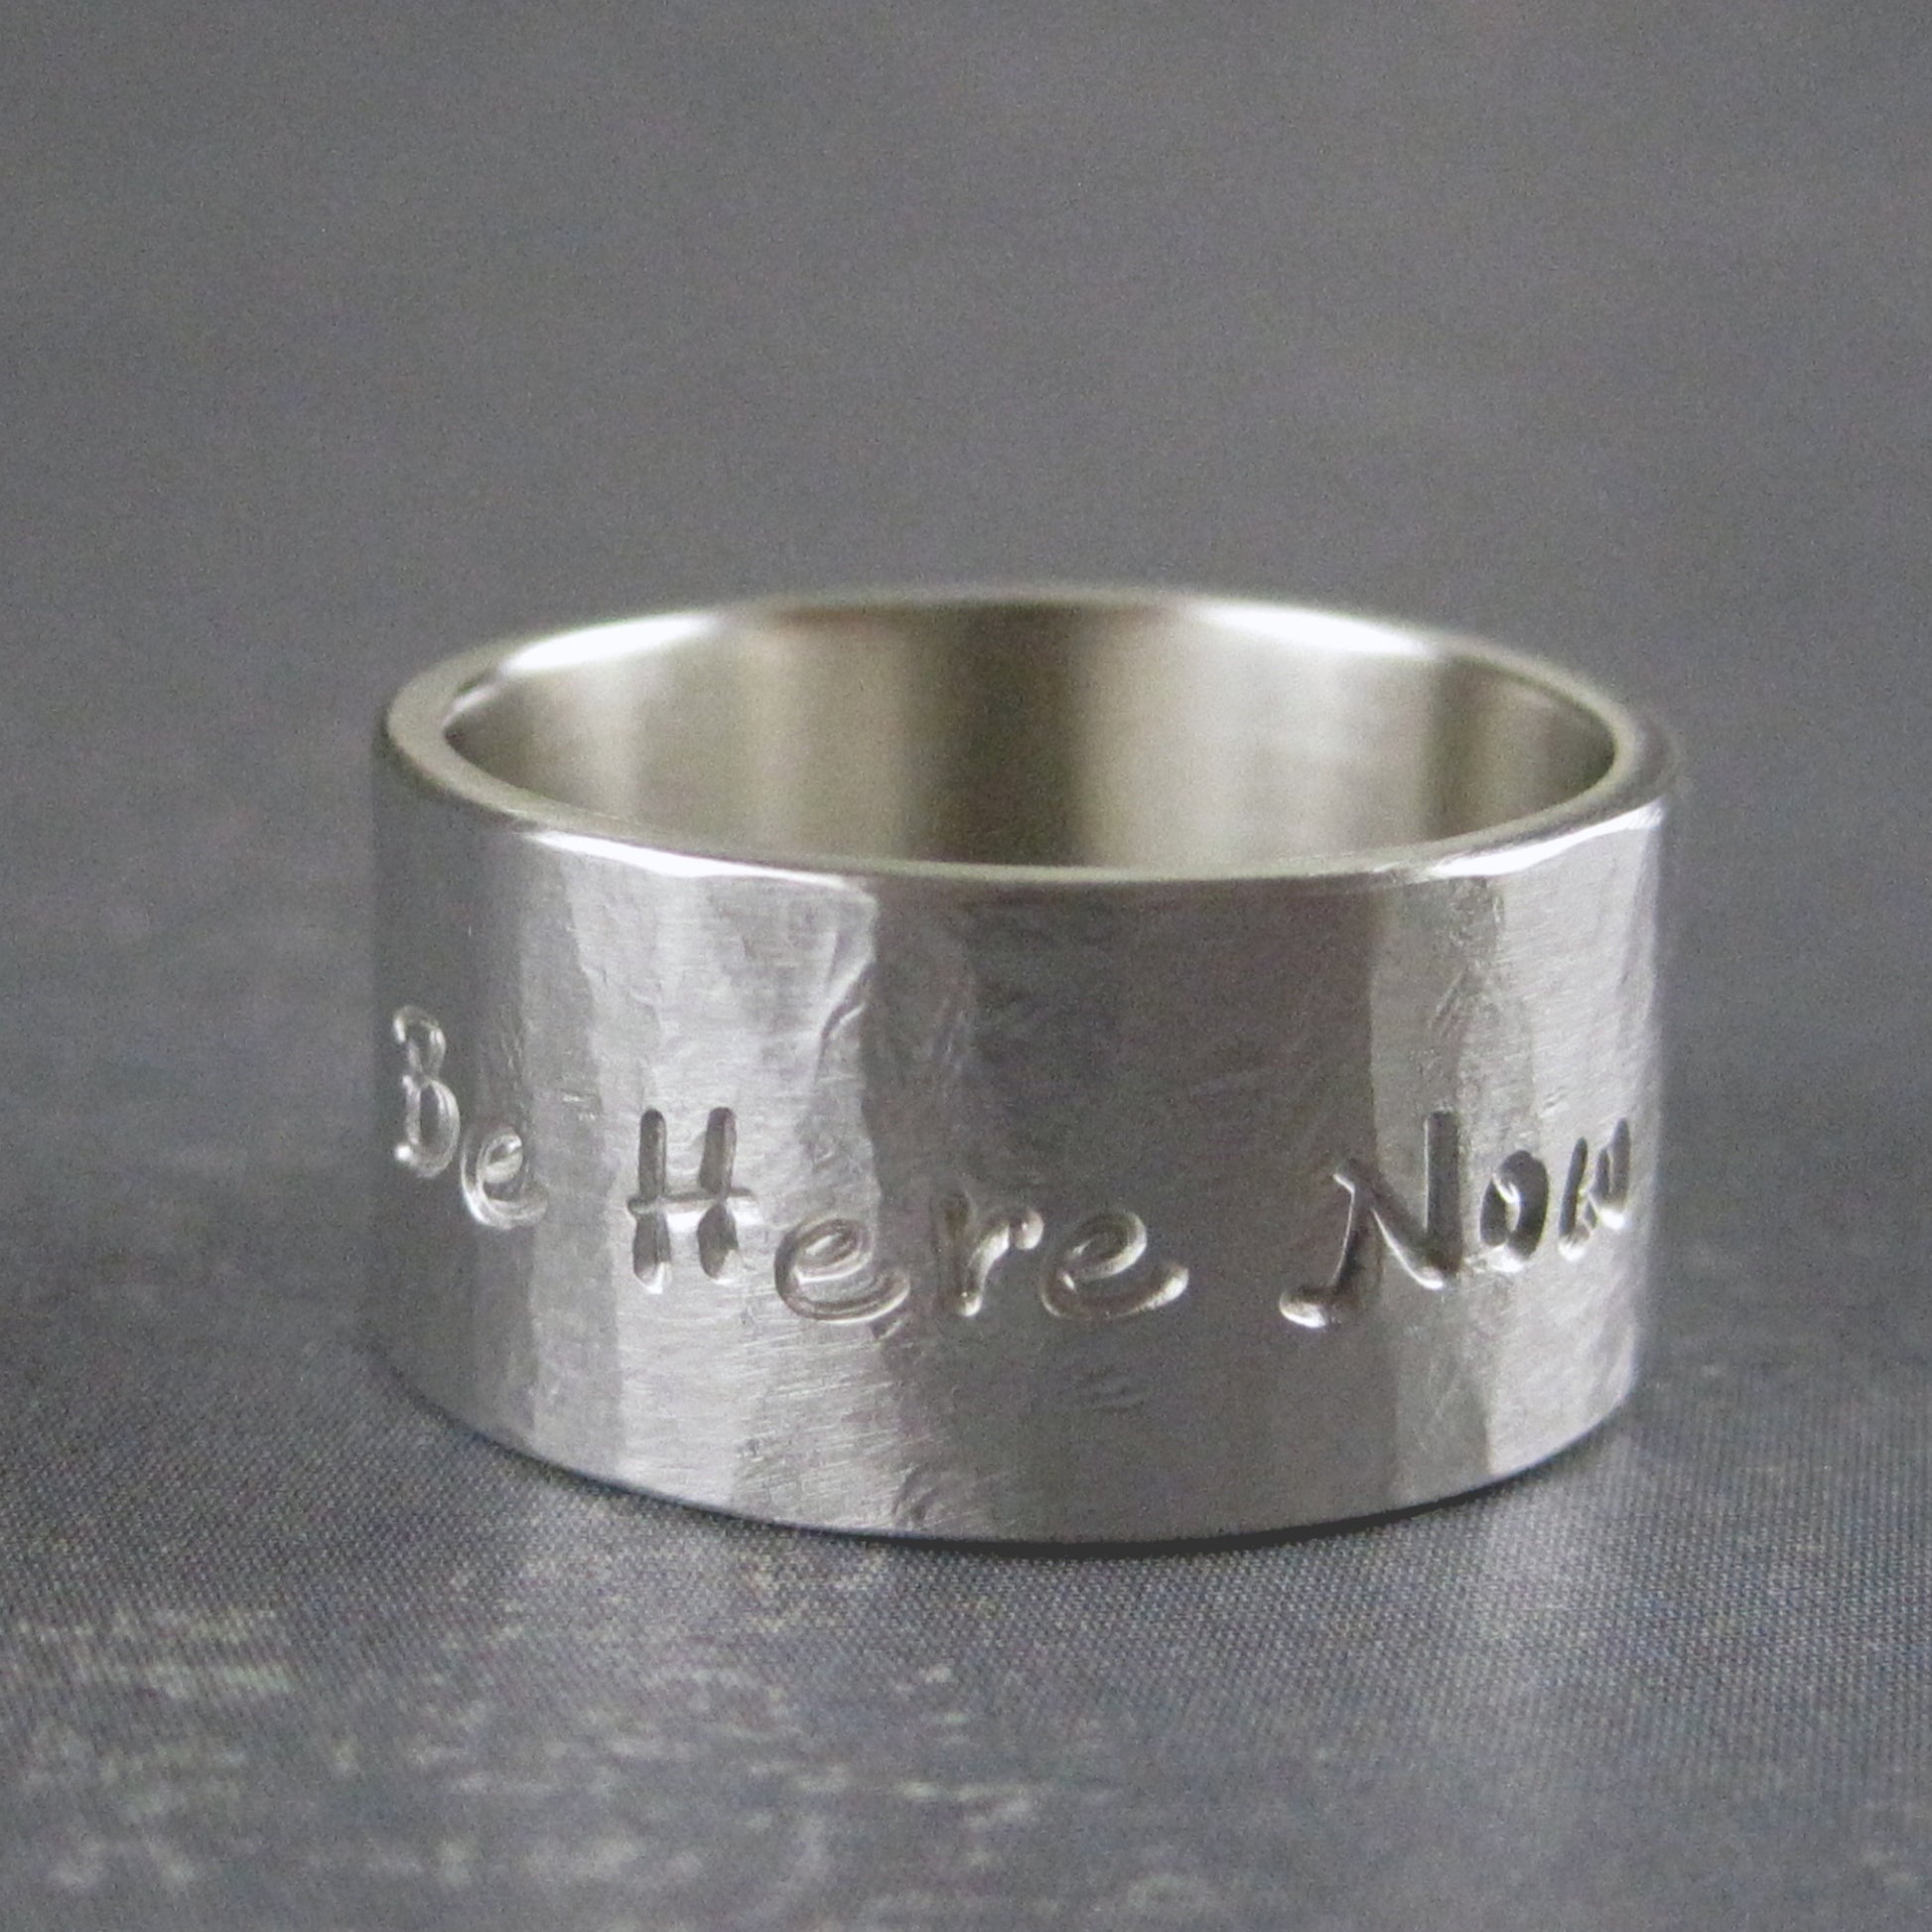 Silver ring with example of personalized inscription